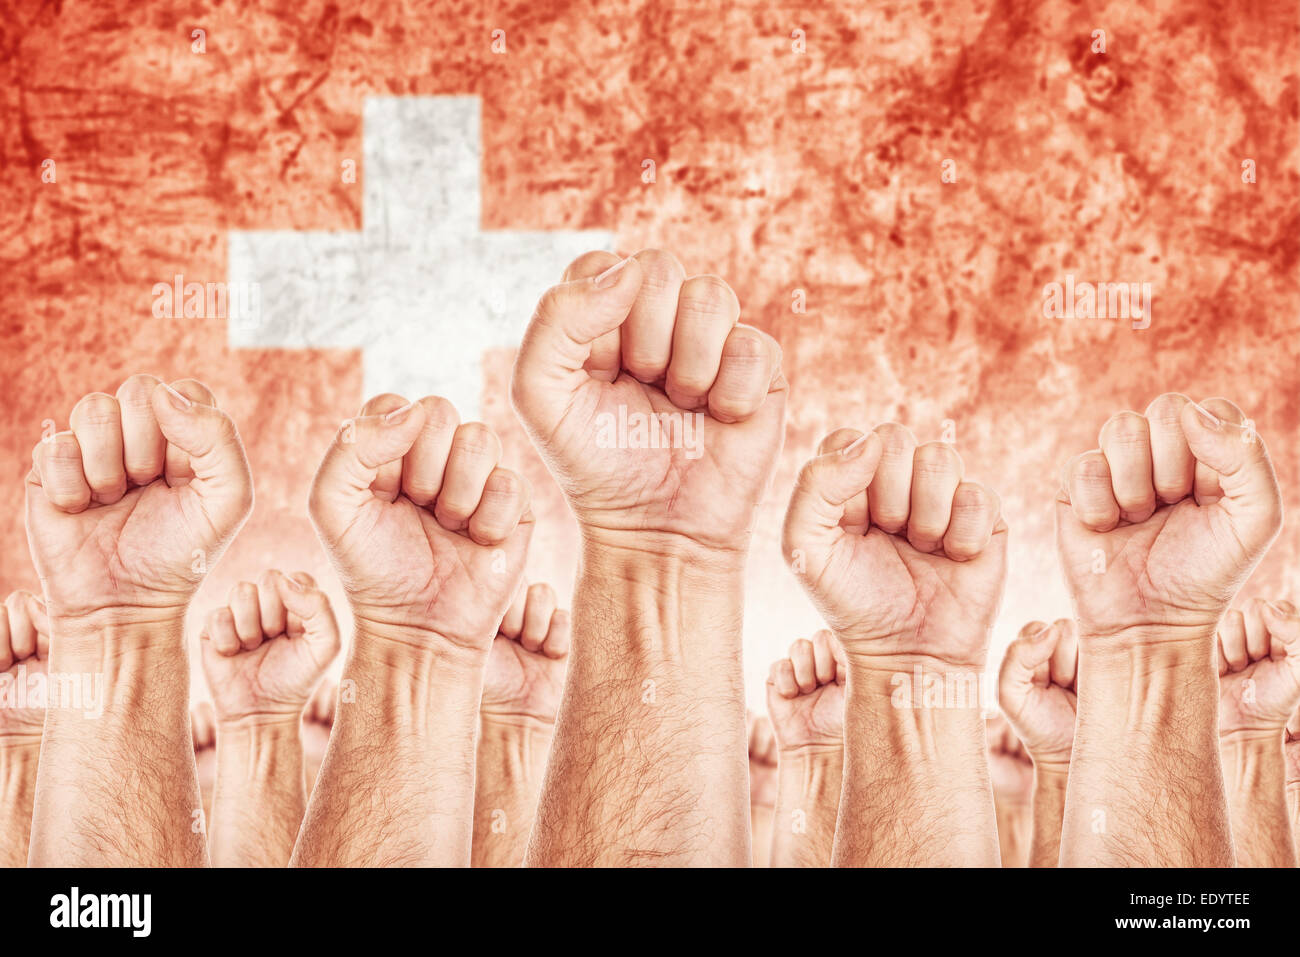 Switzerland Labor movement, workers union strike concept with male fists raised in the air fighting for their rights Stock Photo